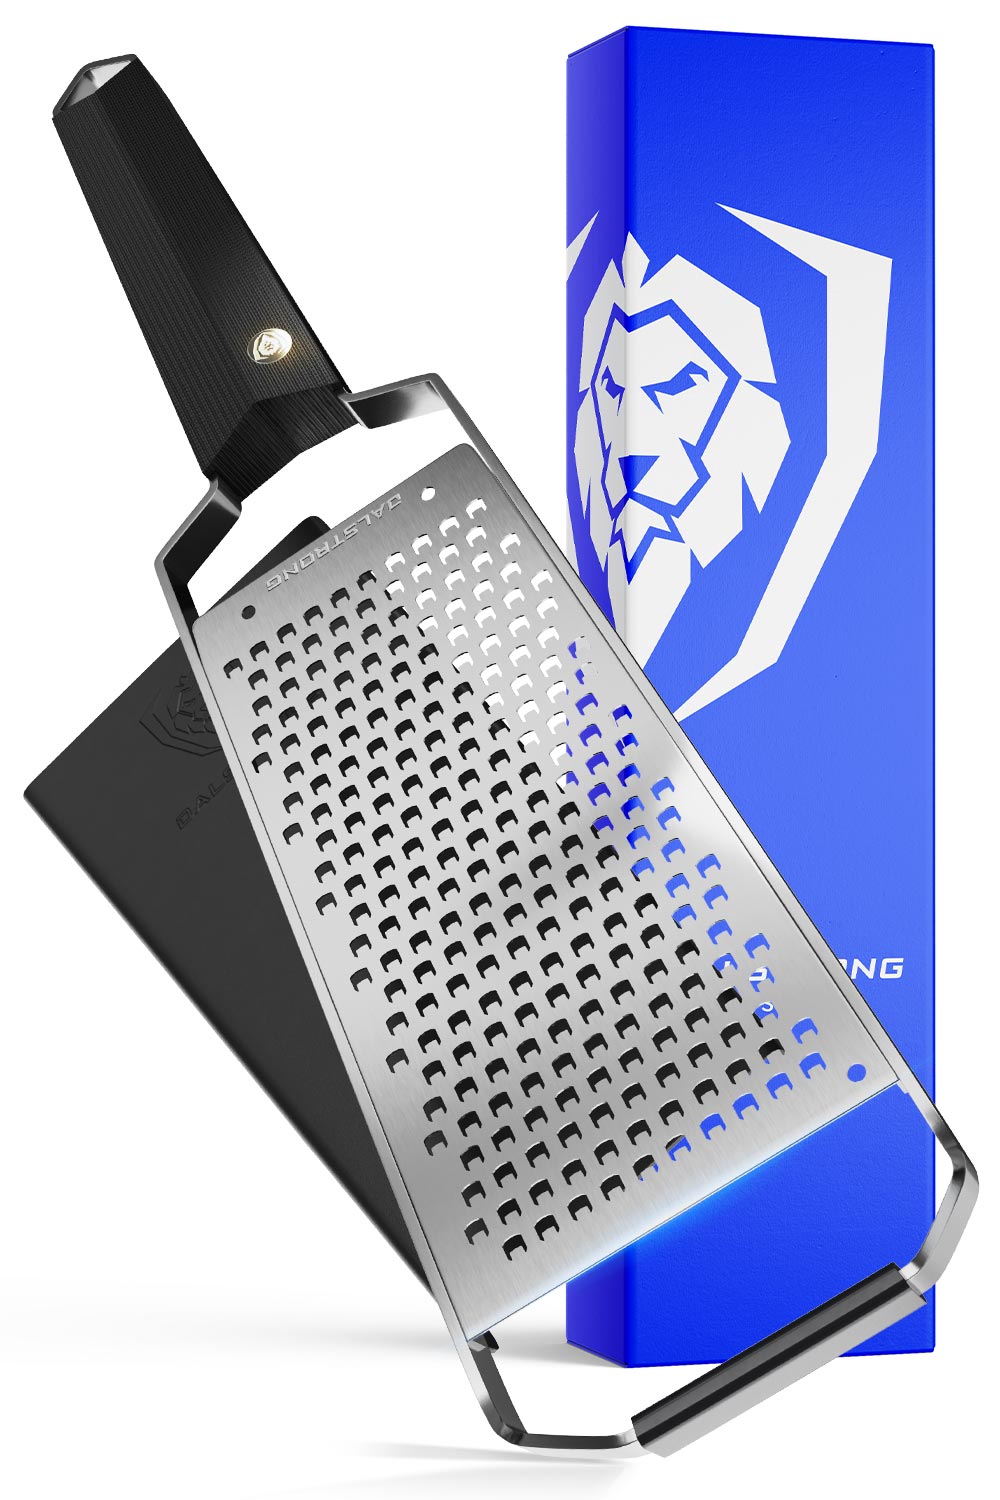 Professional Coarse Wide Cheese Grater | Dalstrong ©